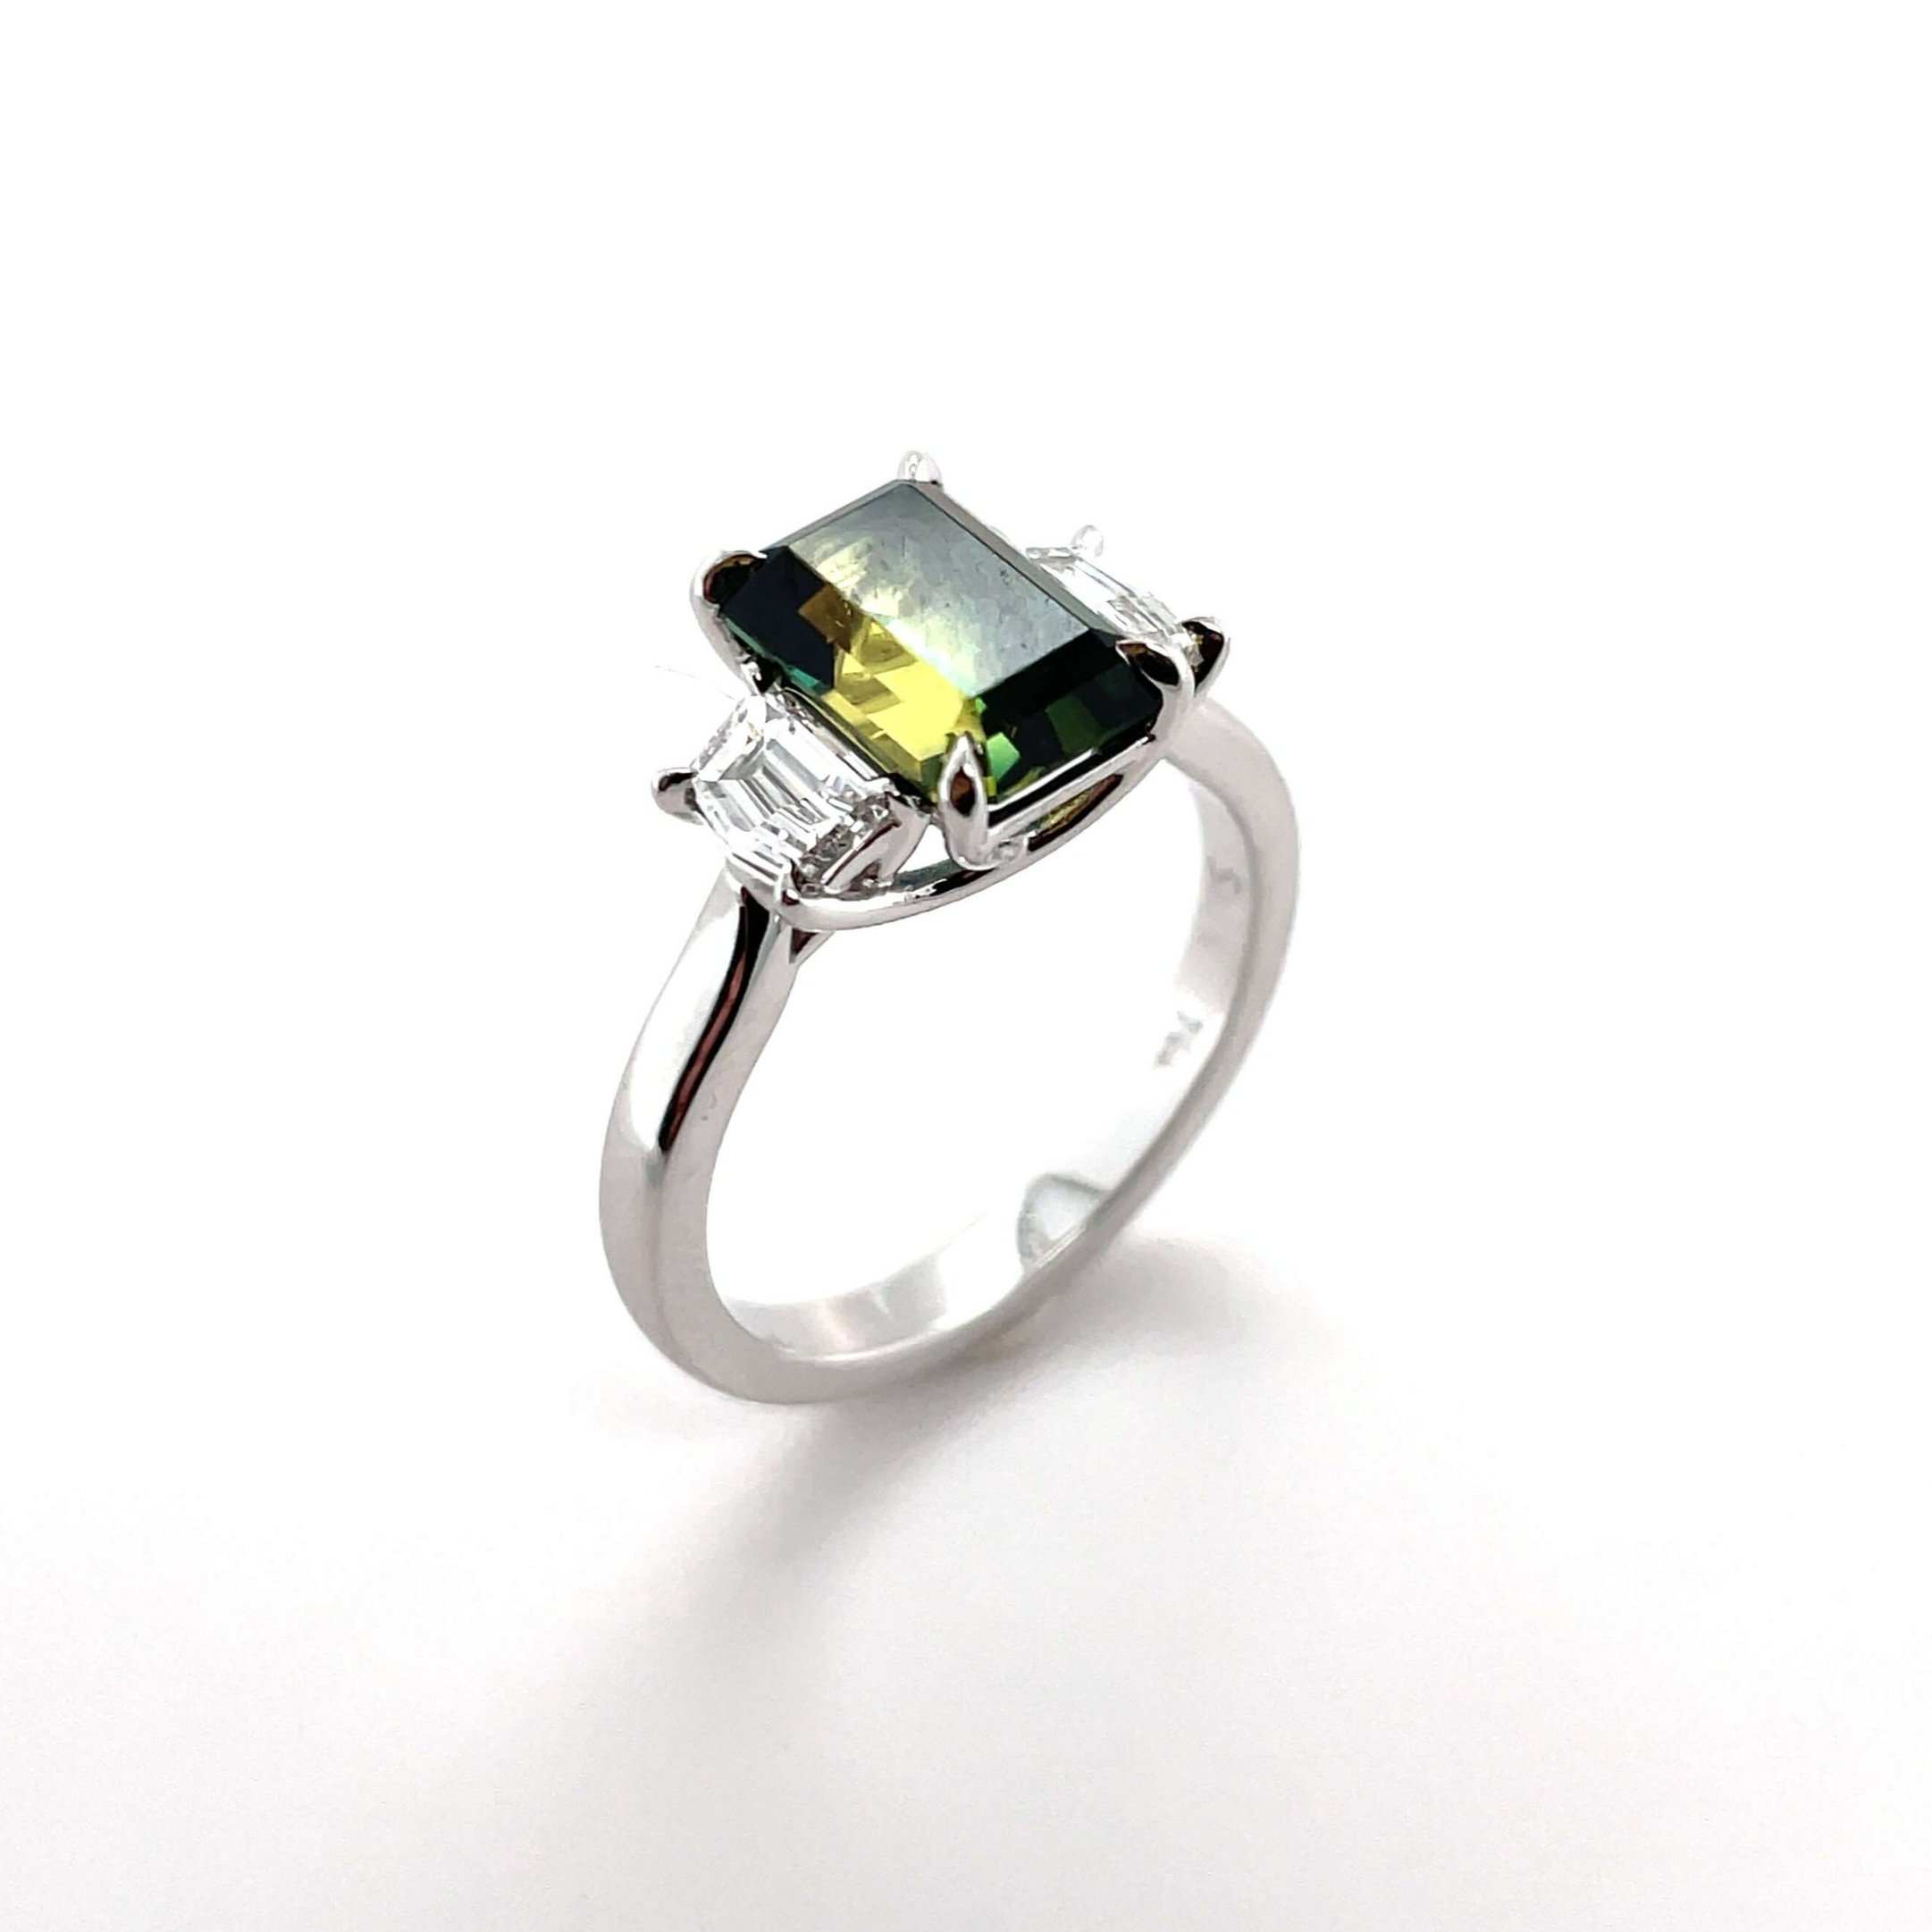 Shop Sterns Colour Gemstone Engagement Rings Online In S.A | Bash